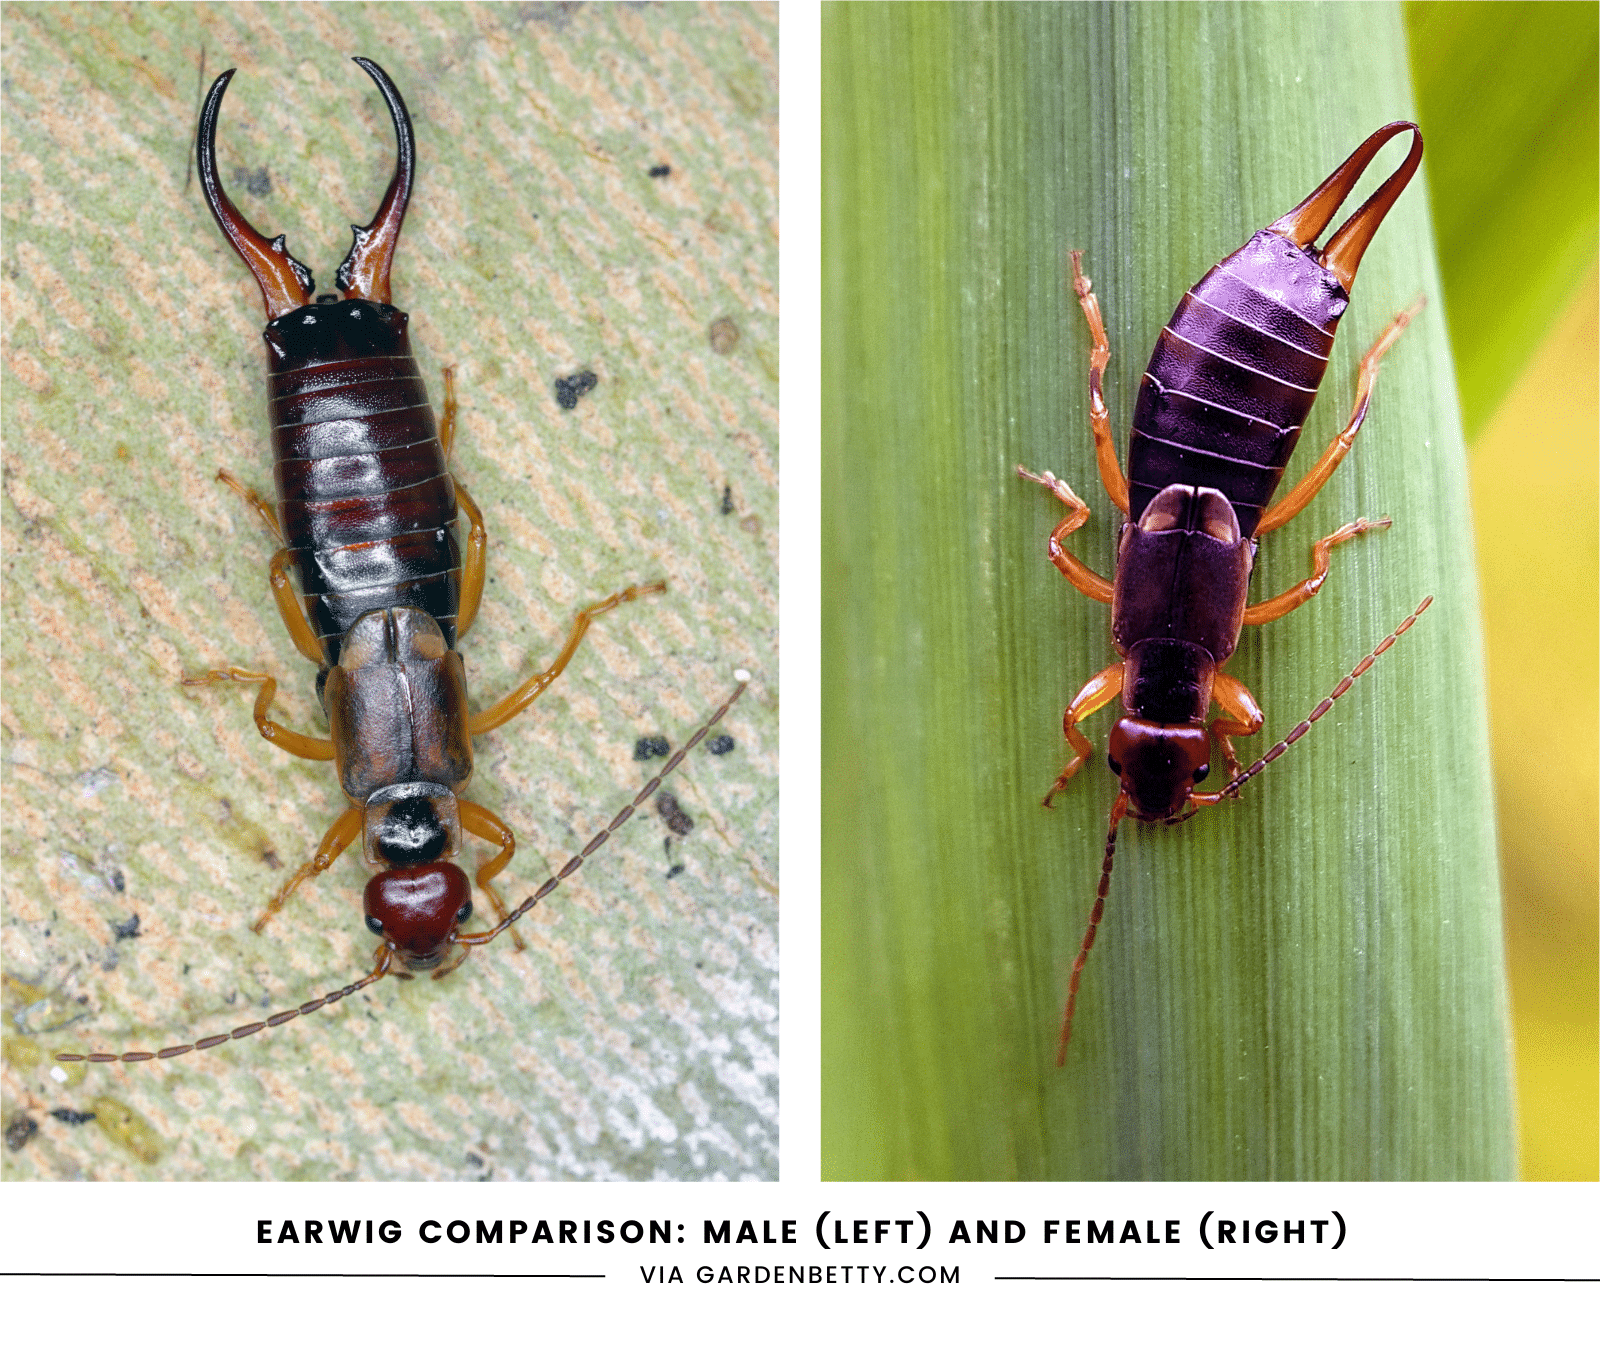 Comparison of a male earwig's curved cerci with a female earwig's straight cerci